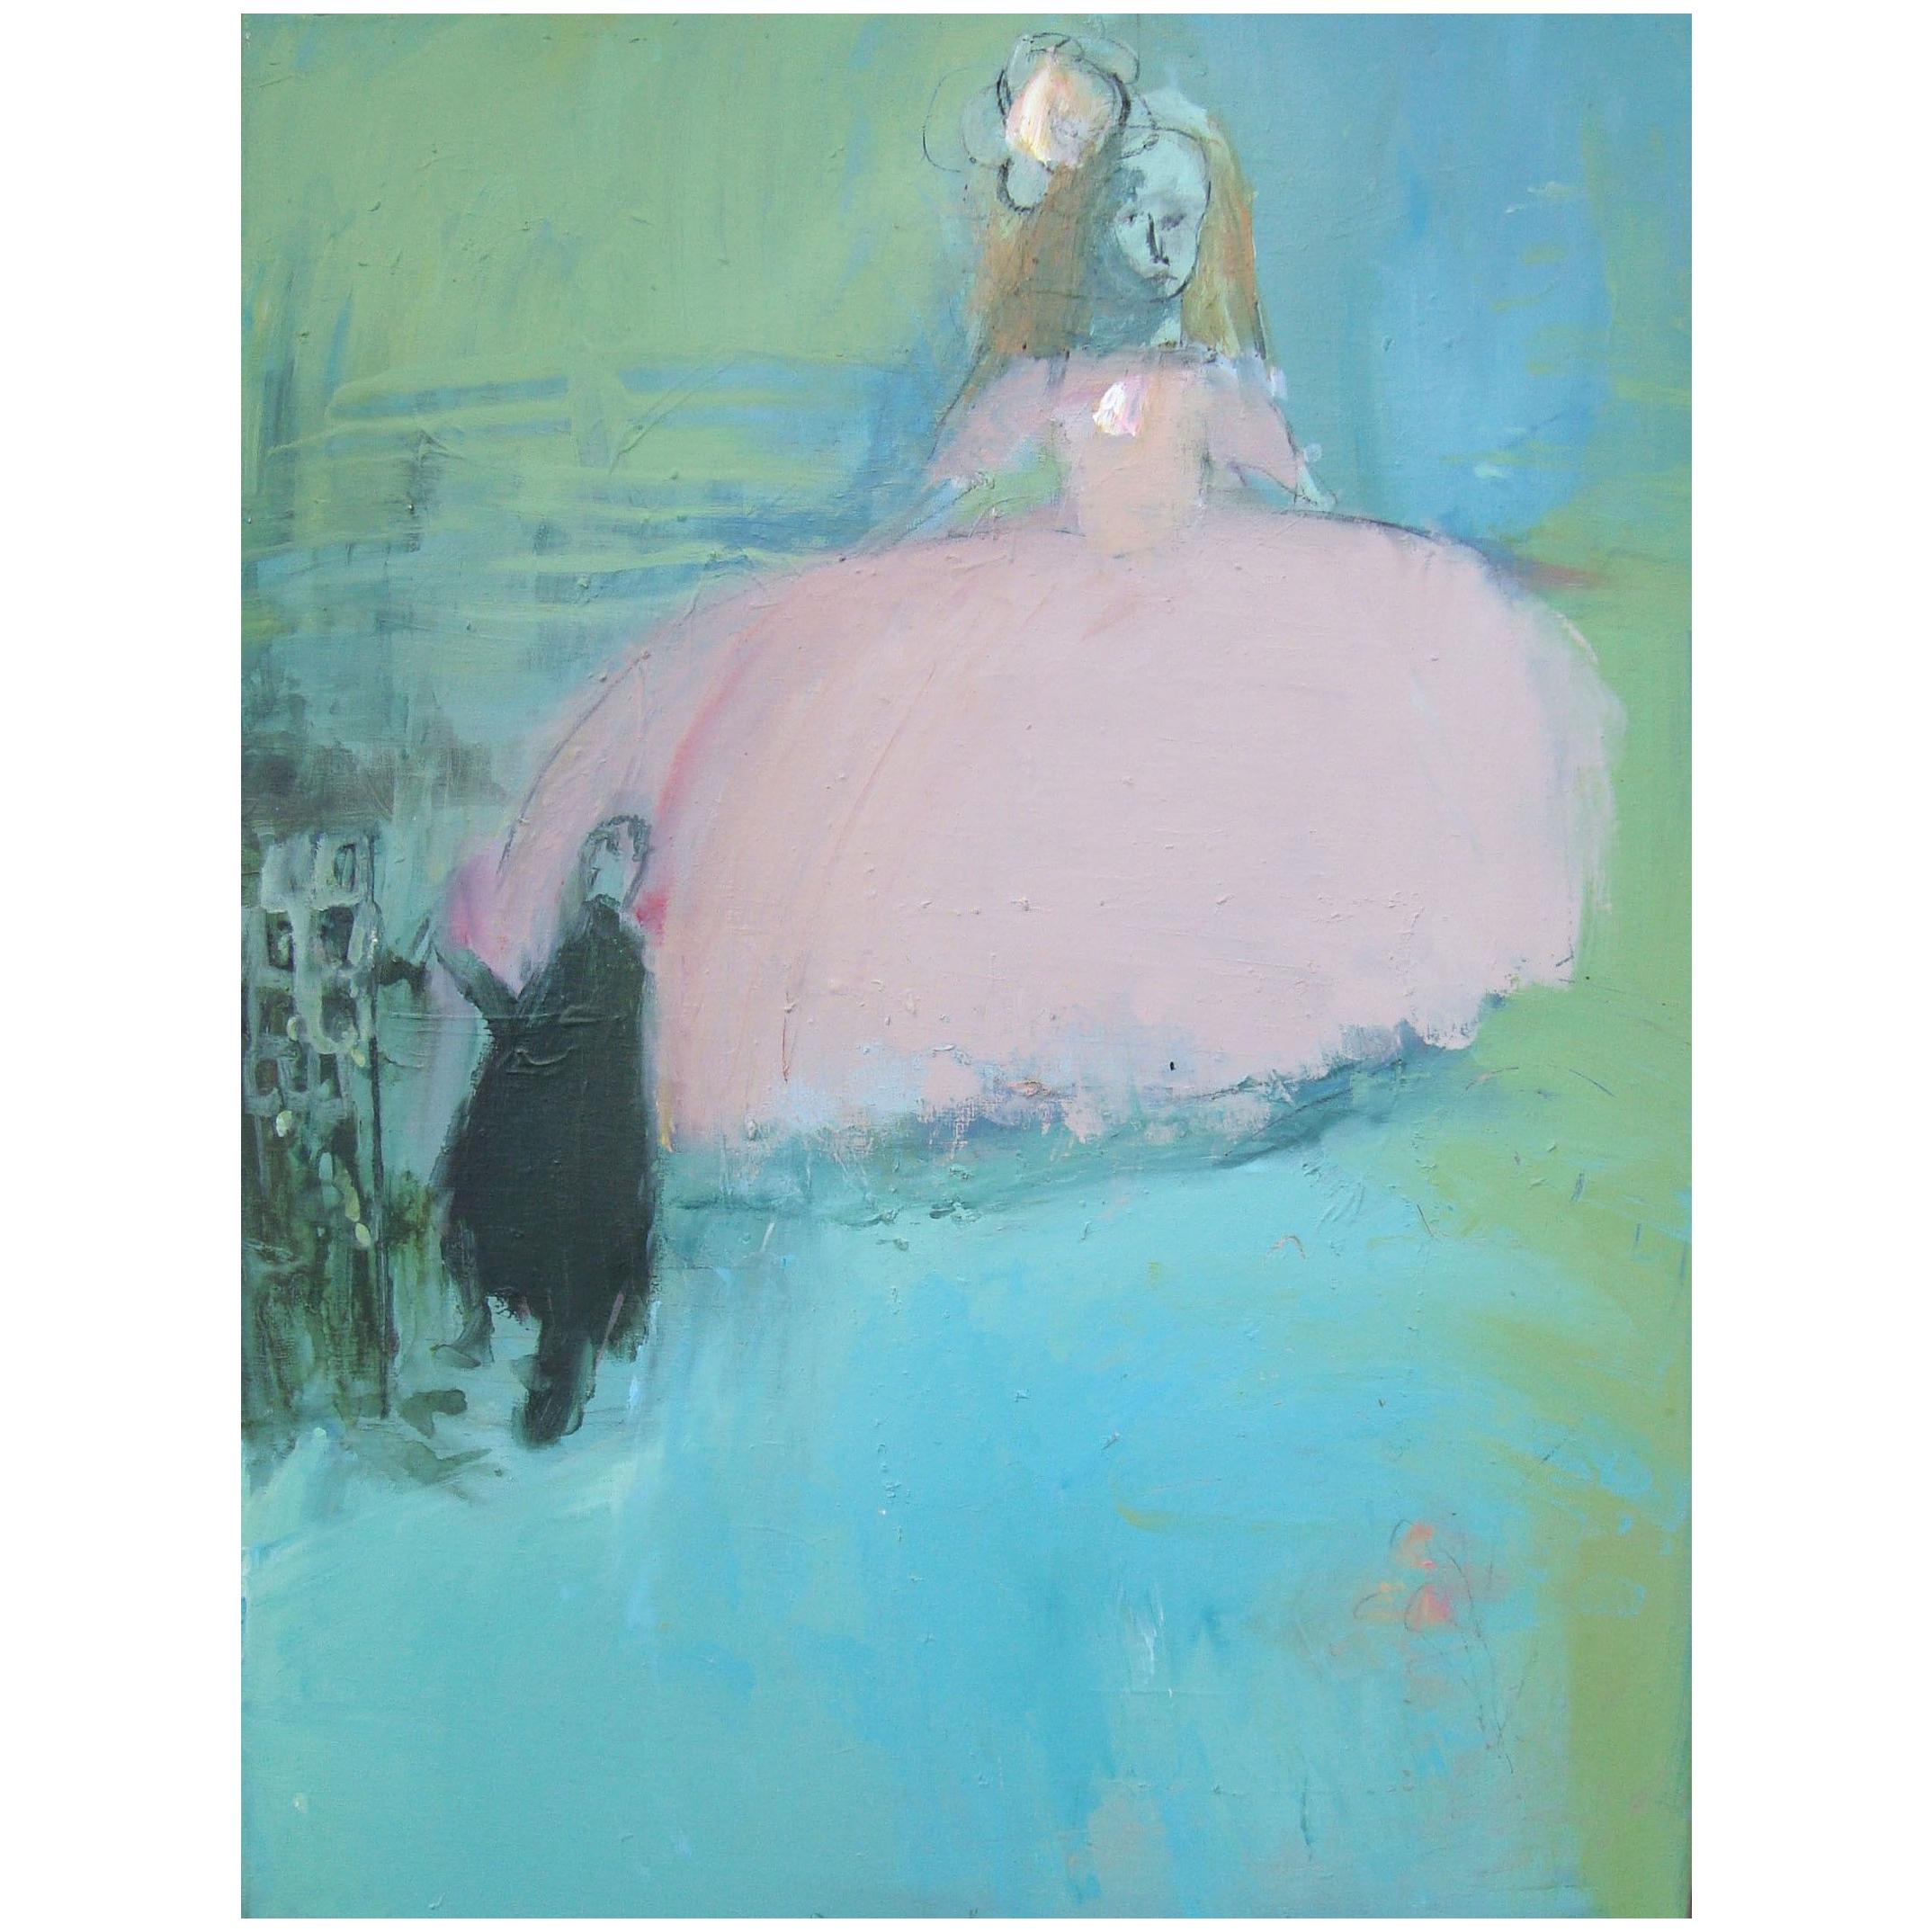 Collection of 3 contemporary, expressionistic paintings by Josie Frances Hadley:

